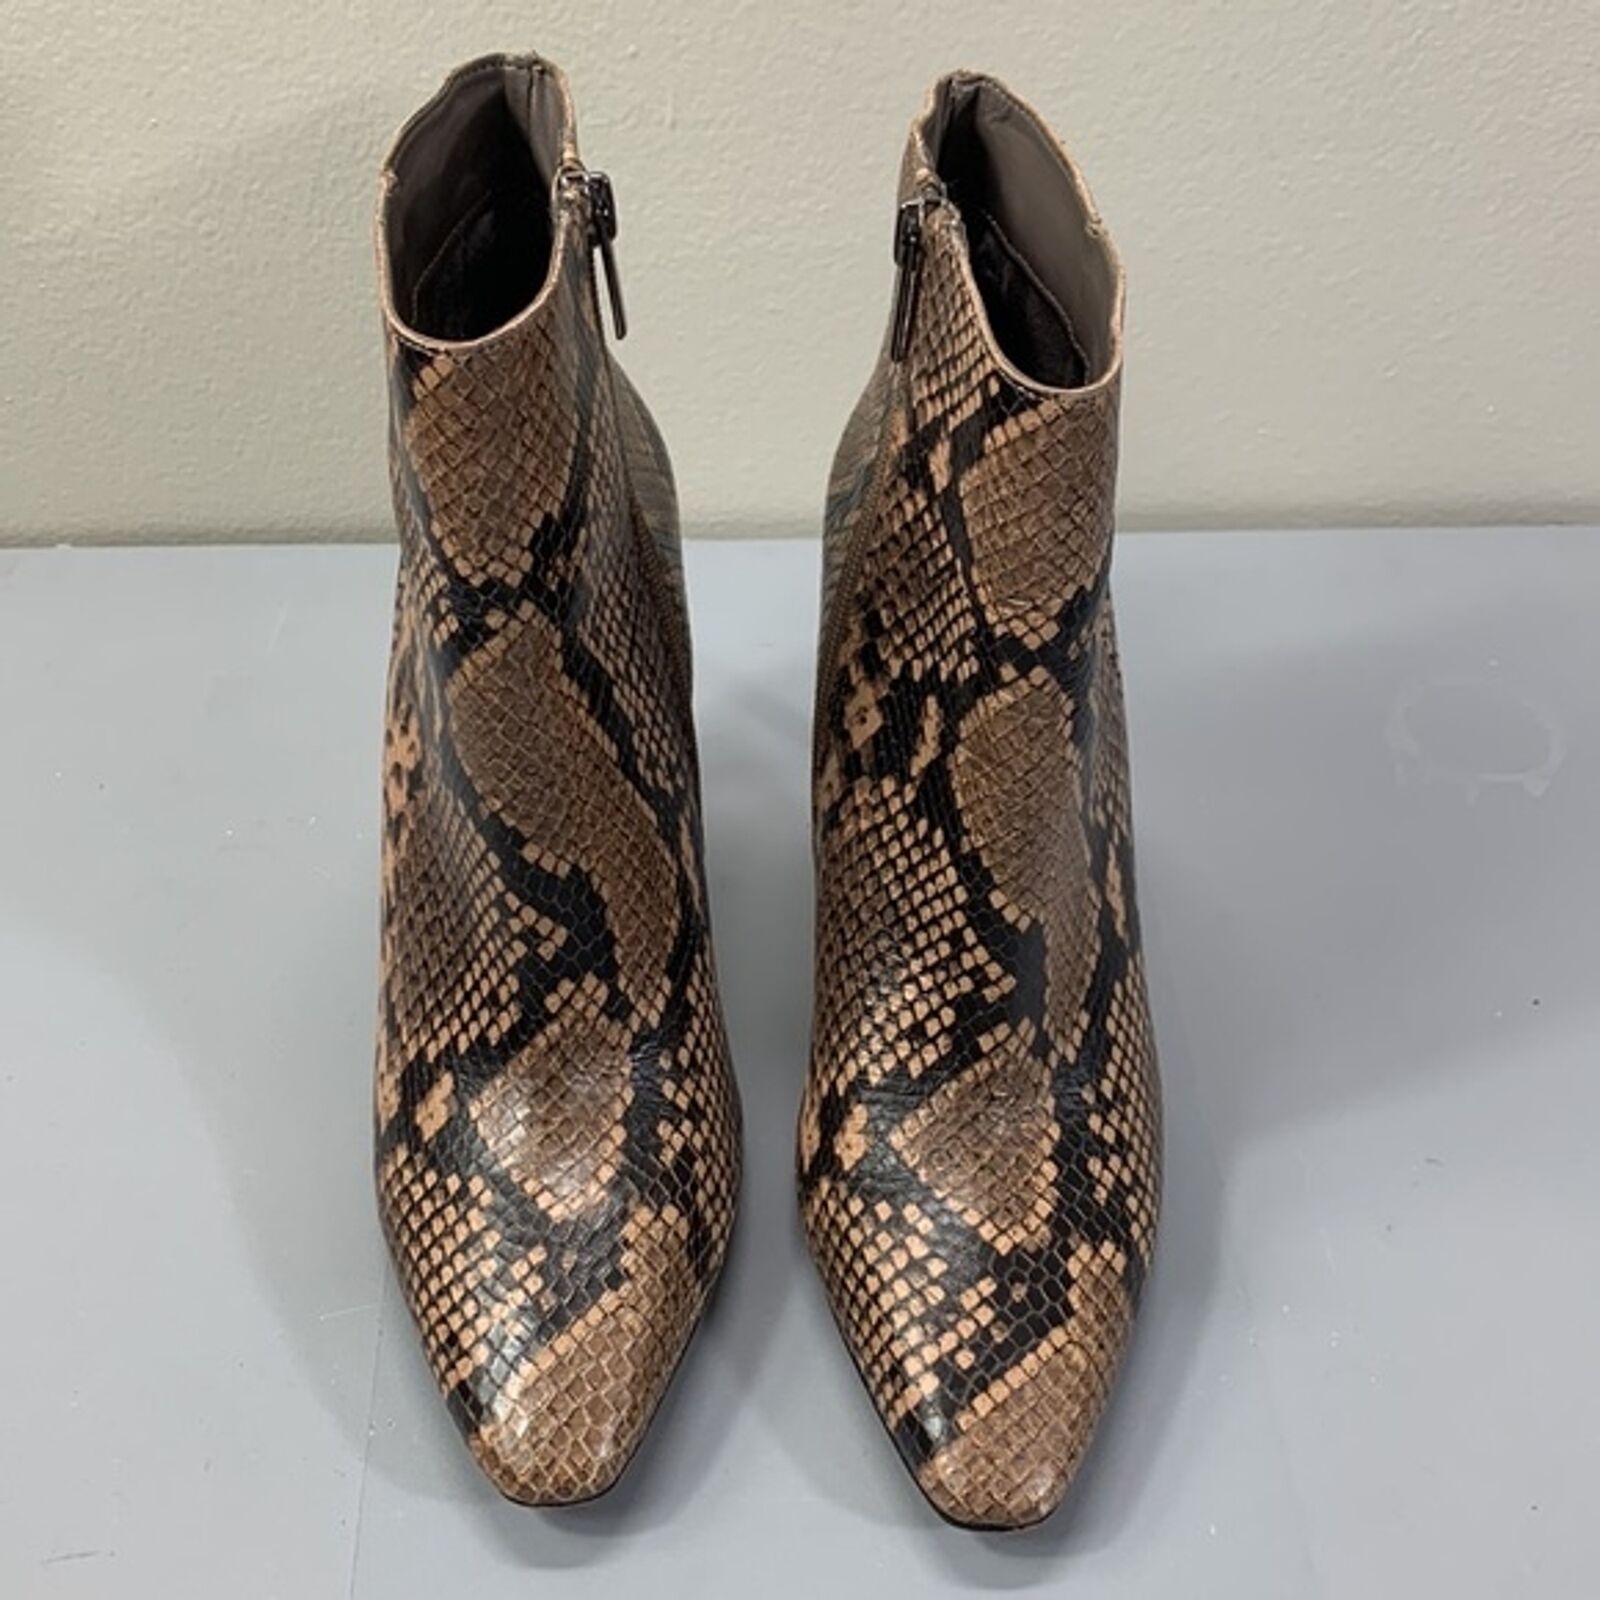 Vince Camuto Women's Snakeskin Heeled Zip Up Ankl… - image 3